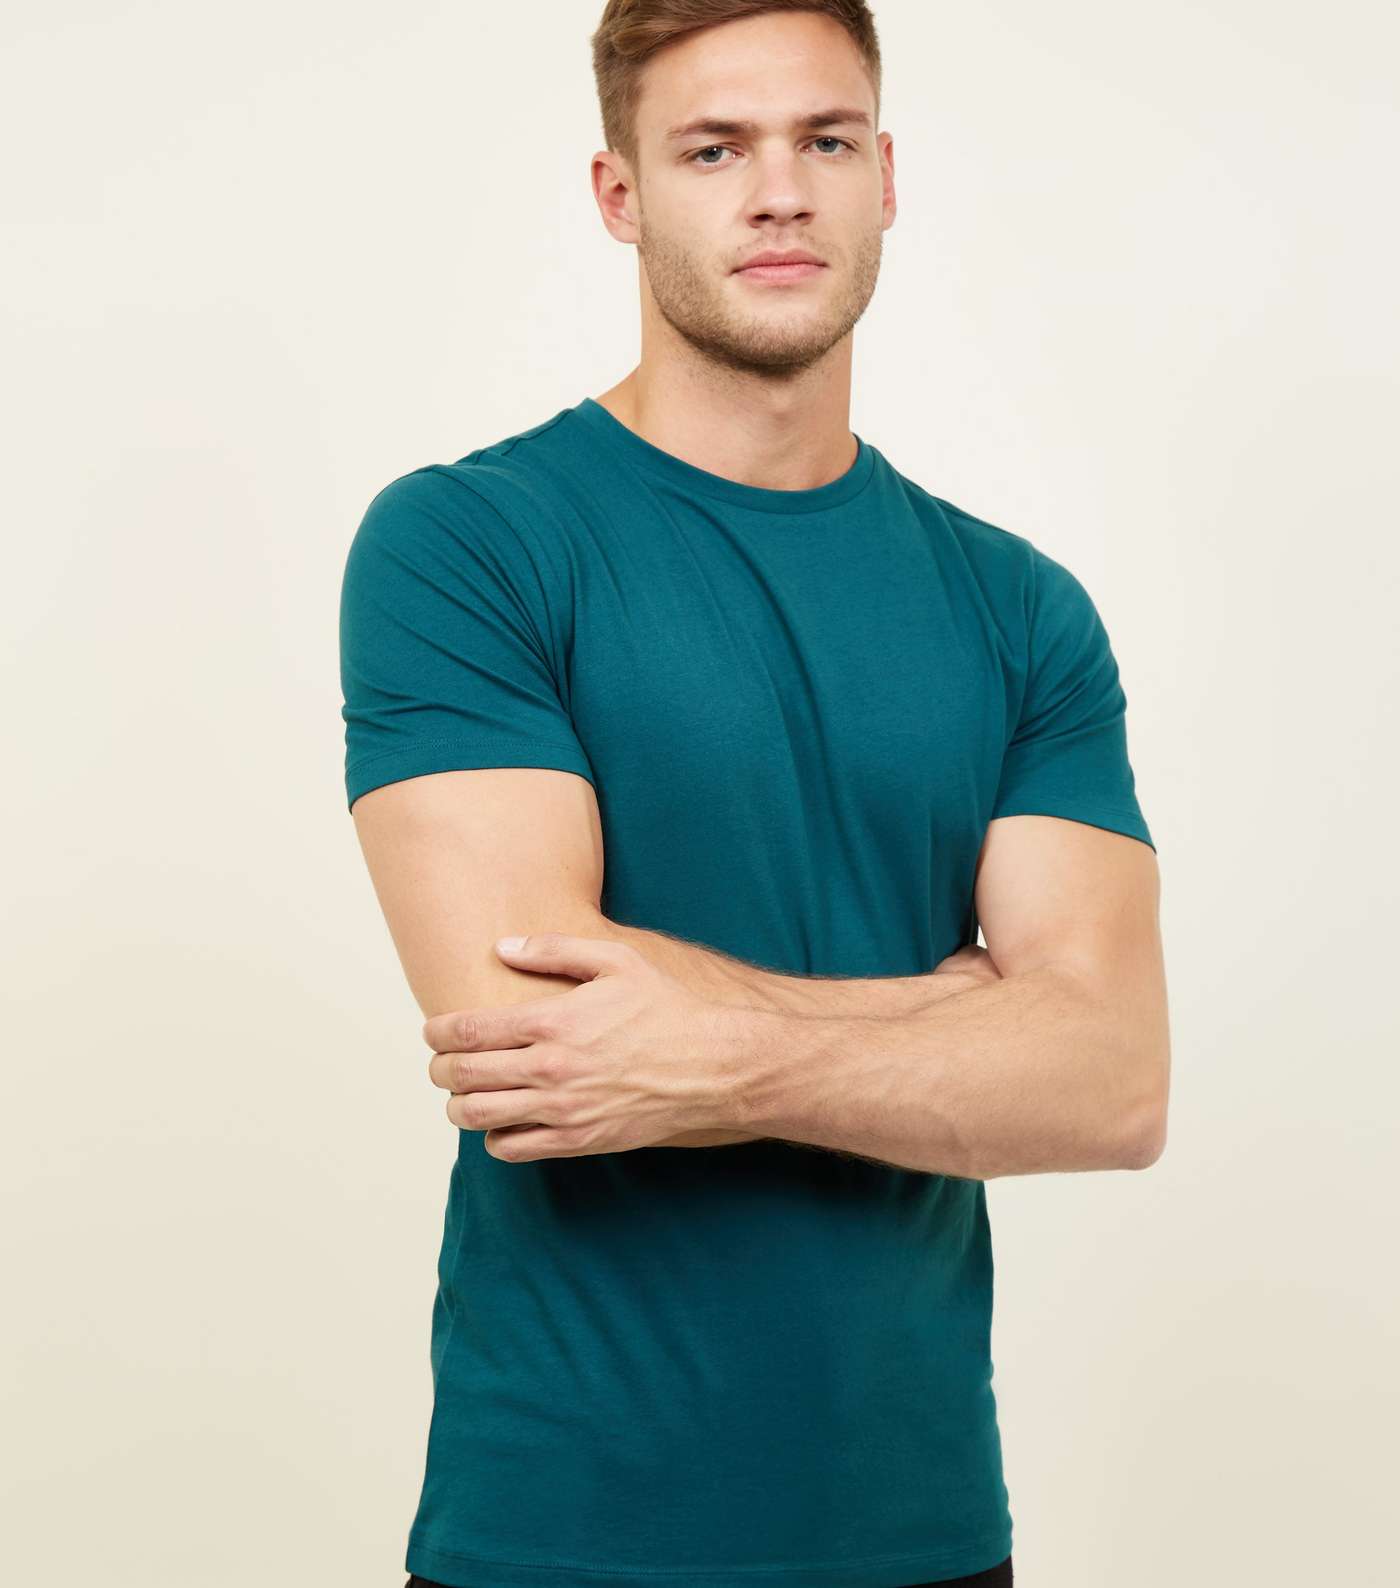 Teal Muscle Fit T-Shirt